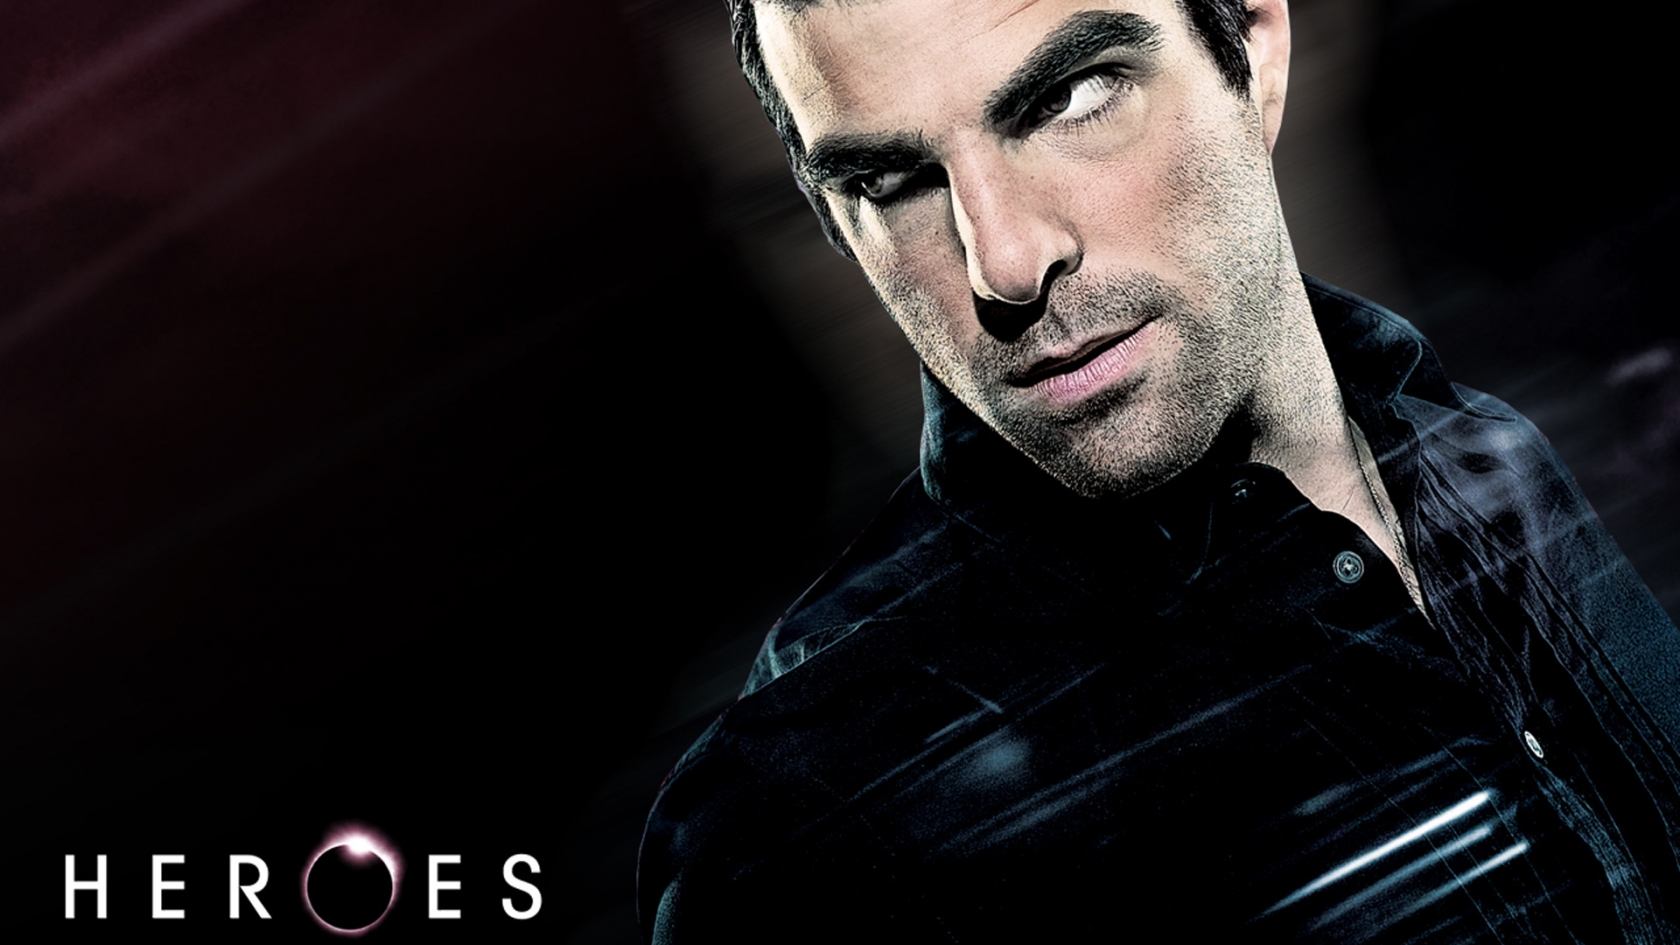 Heroes Sylar for 1680 x 945 HDTV resolution